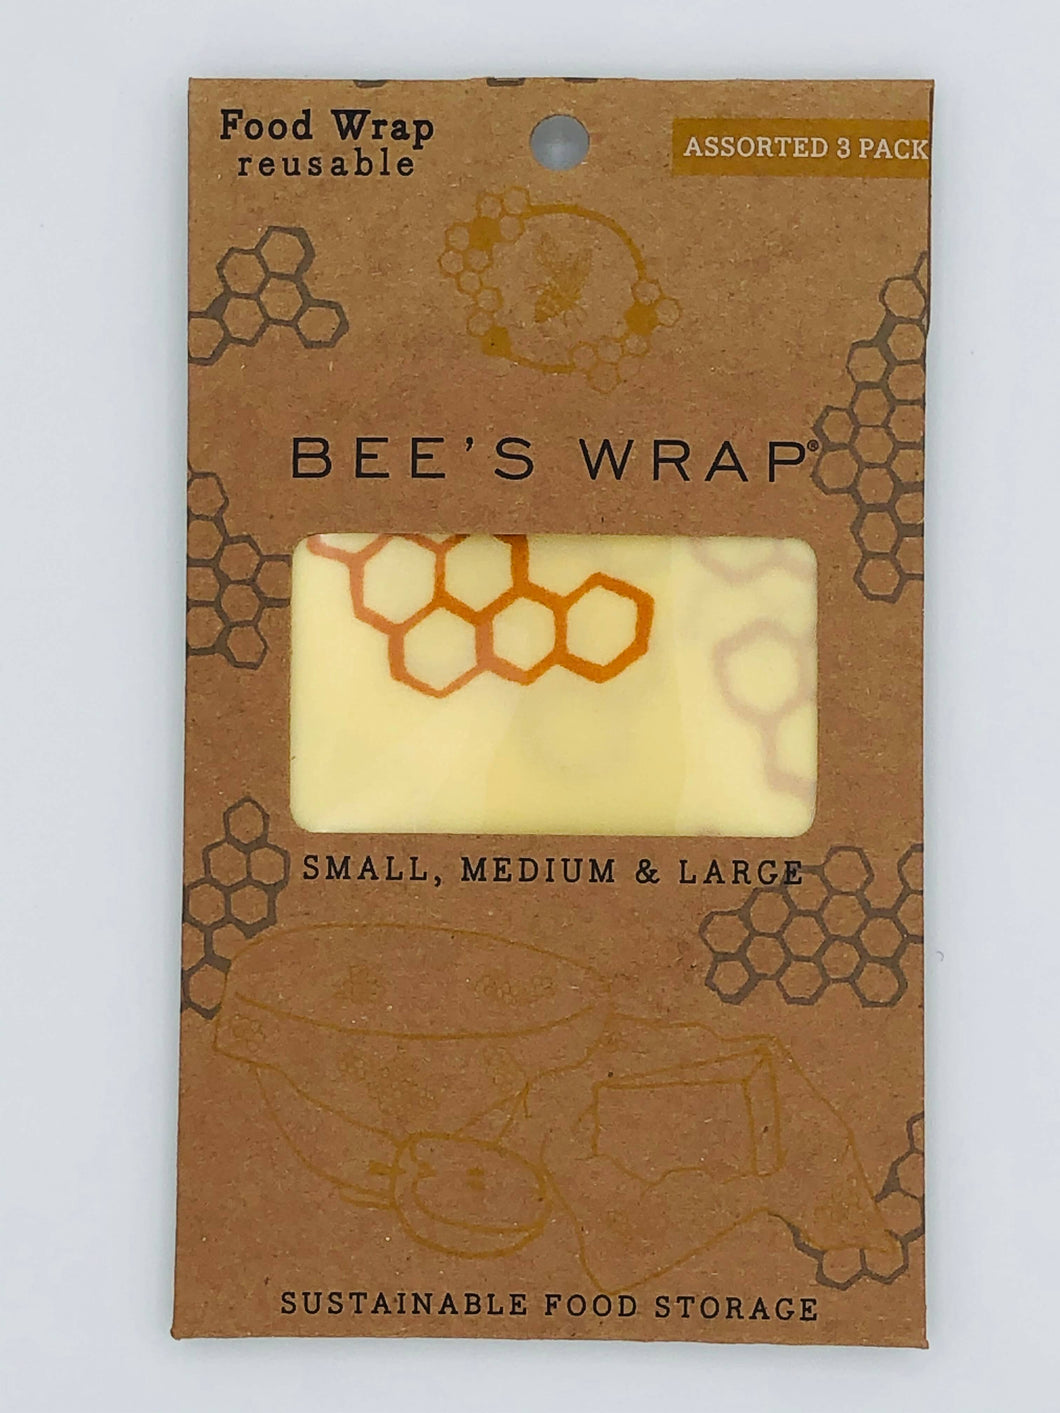 Bees wrap